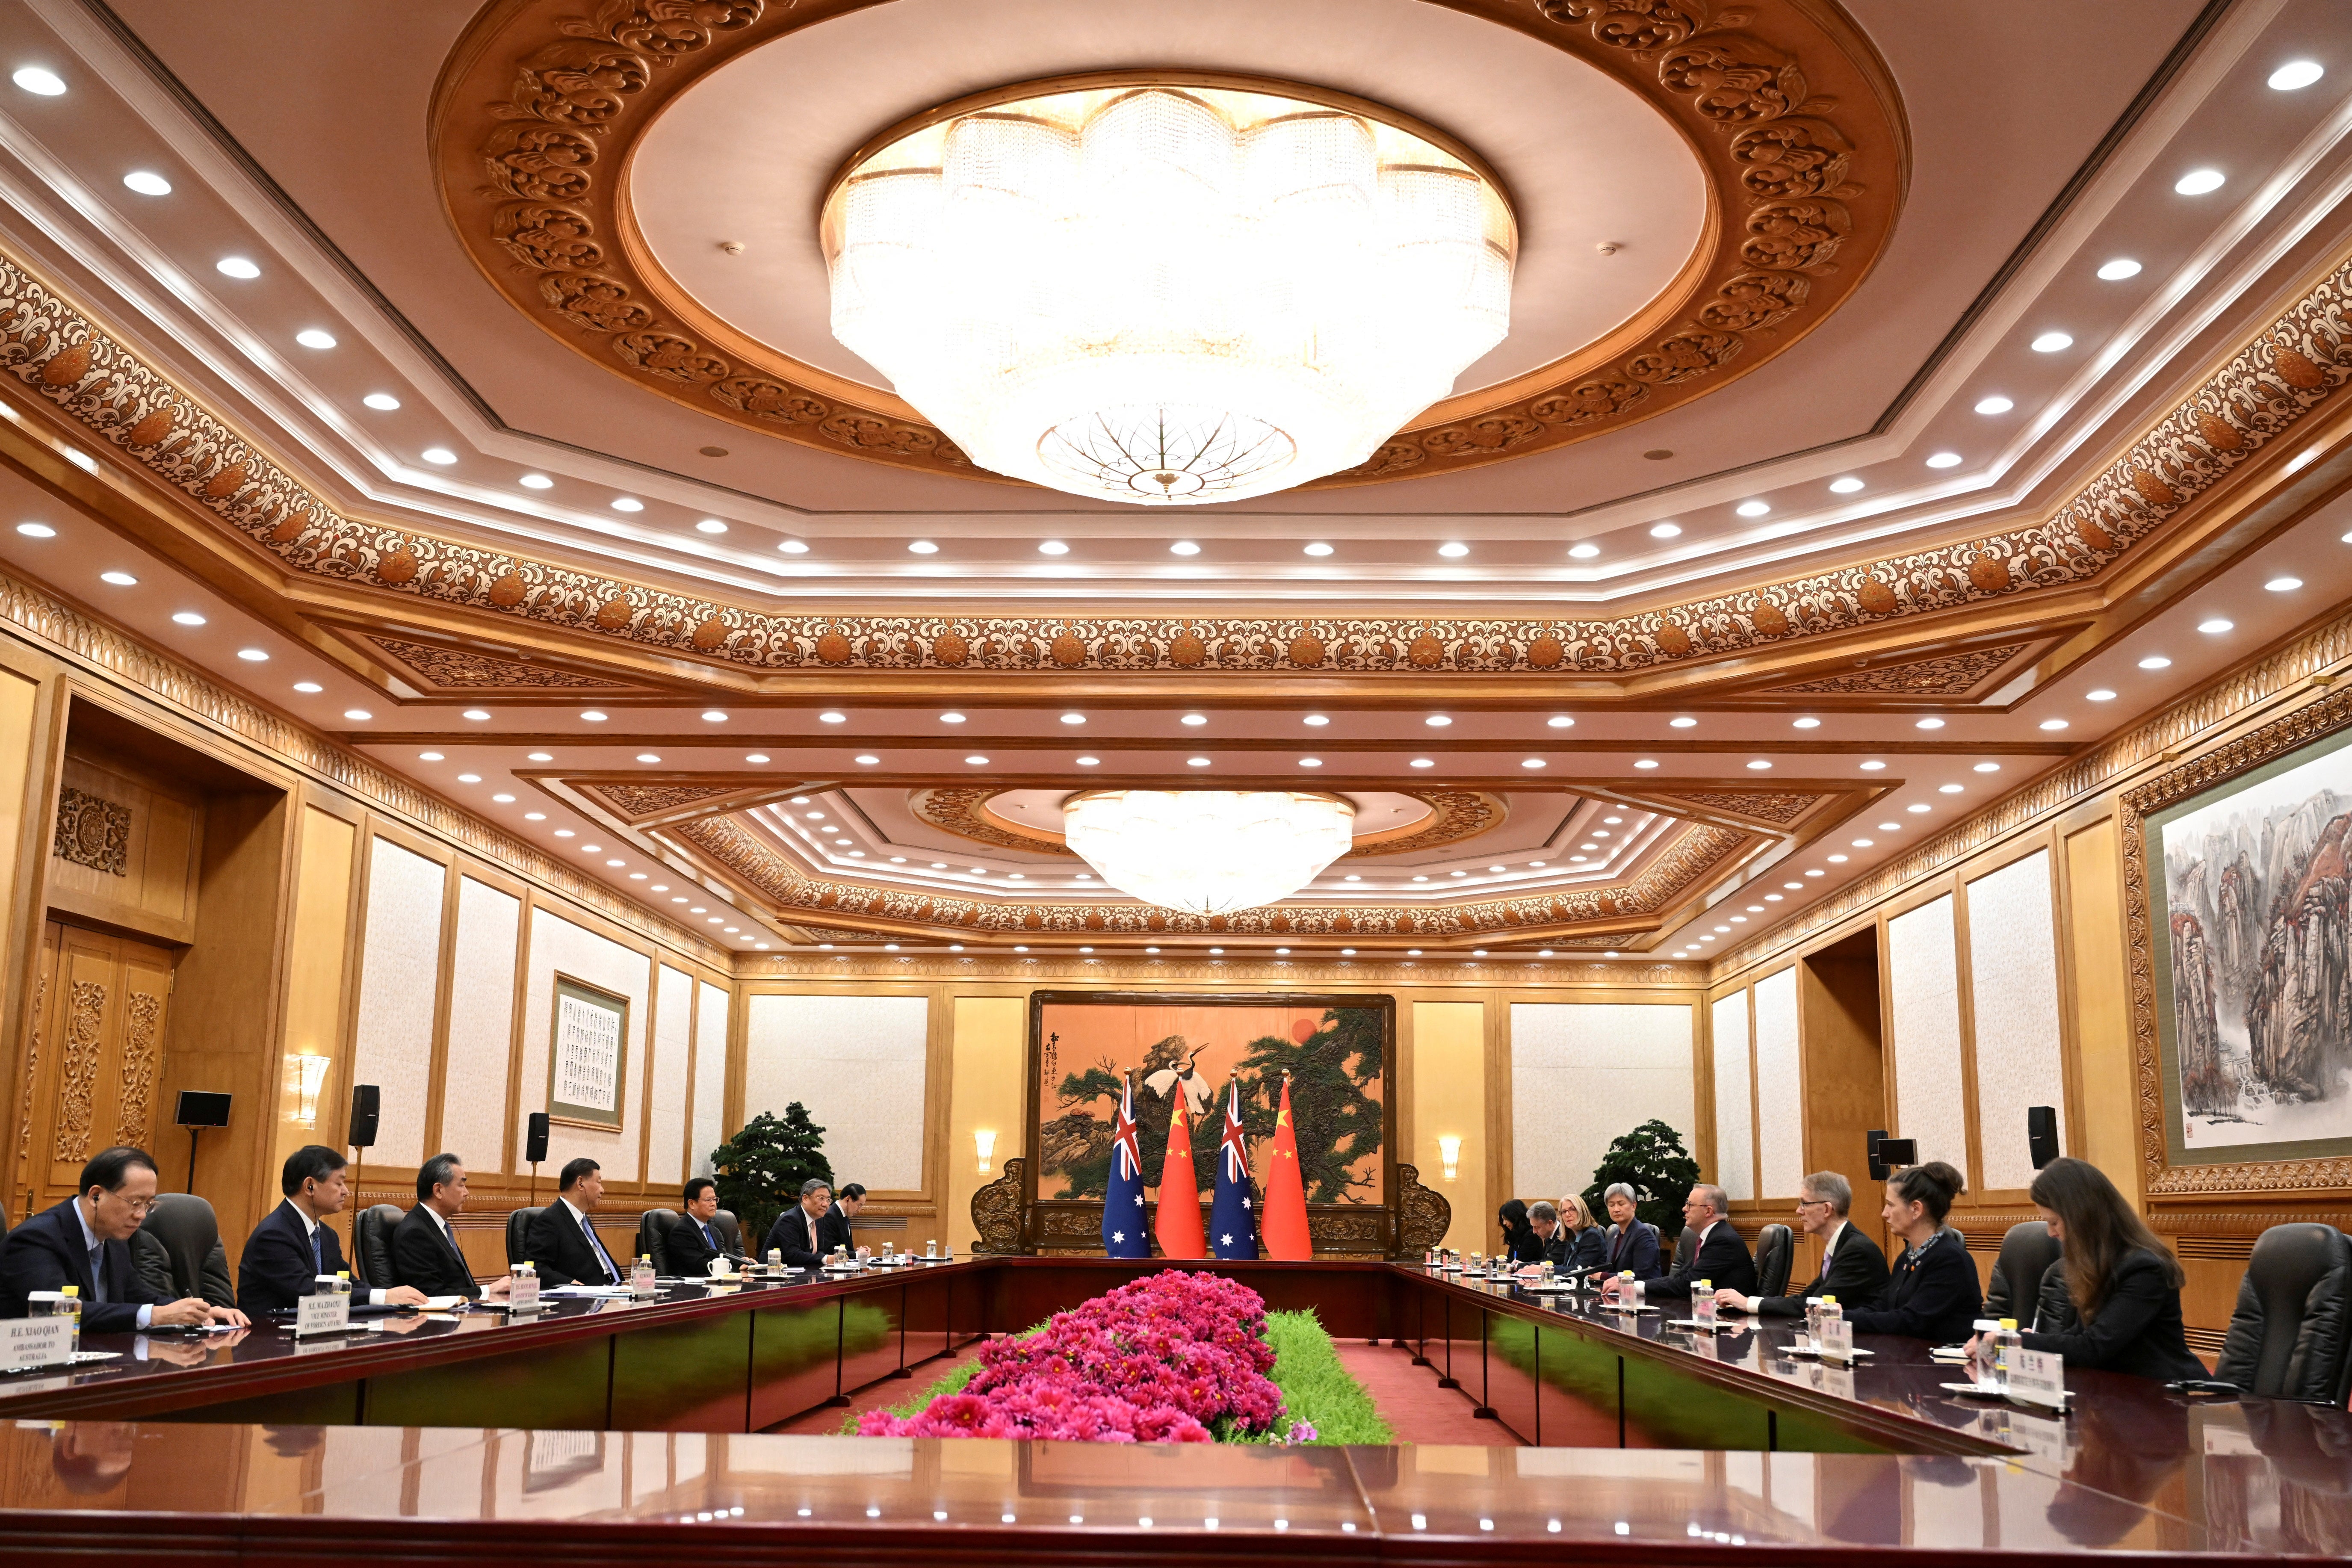 Australia's Prime Minister Anthony Albanese meets with China's President Xi Jinping at the Great Hall of the People in Beijin